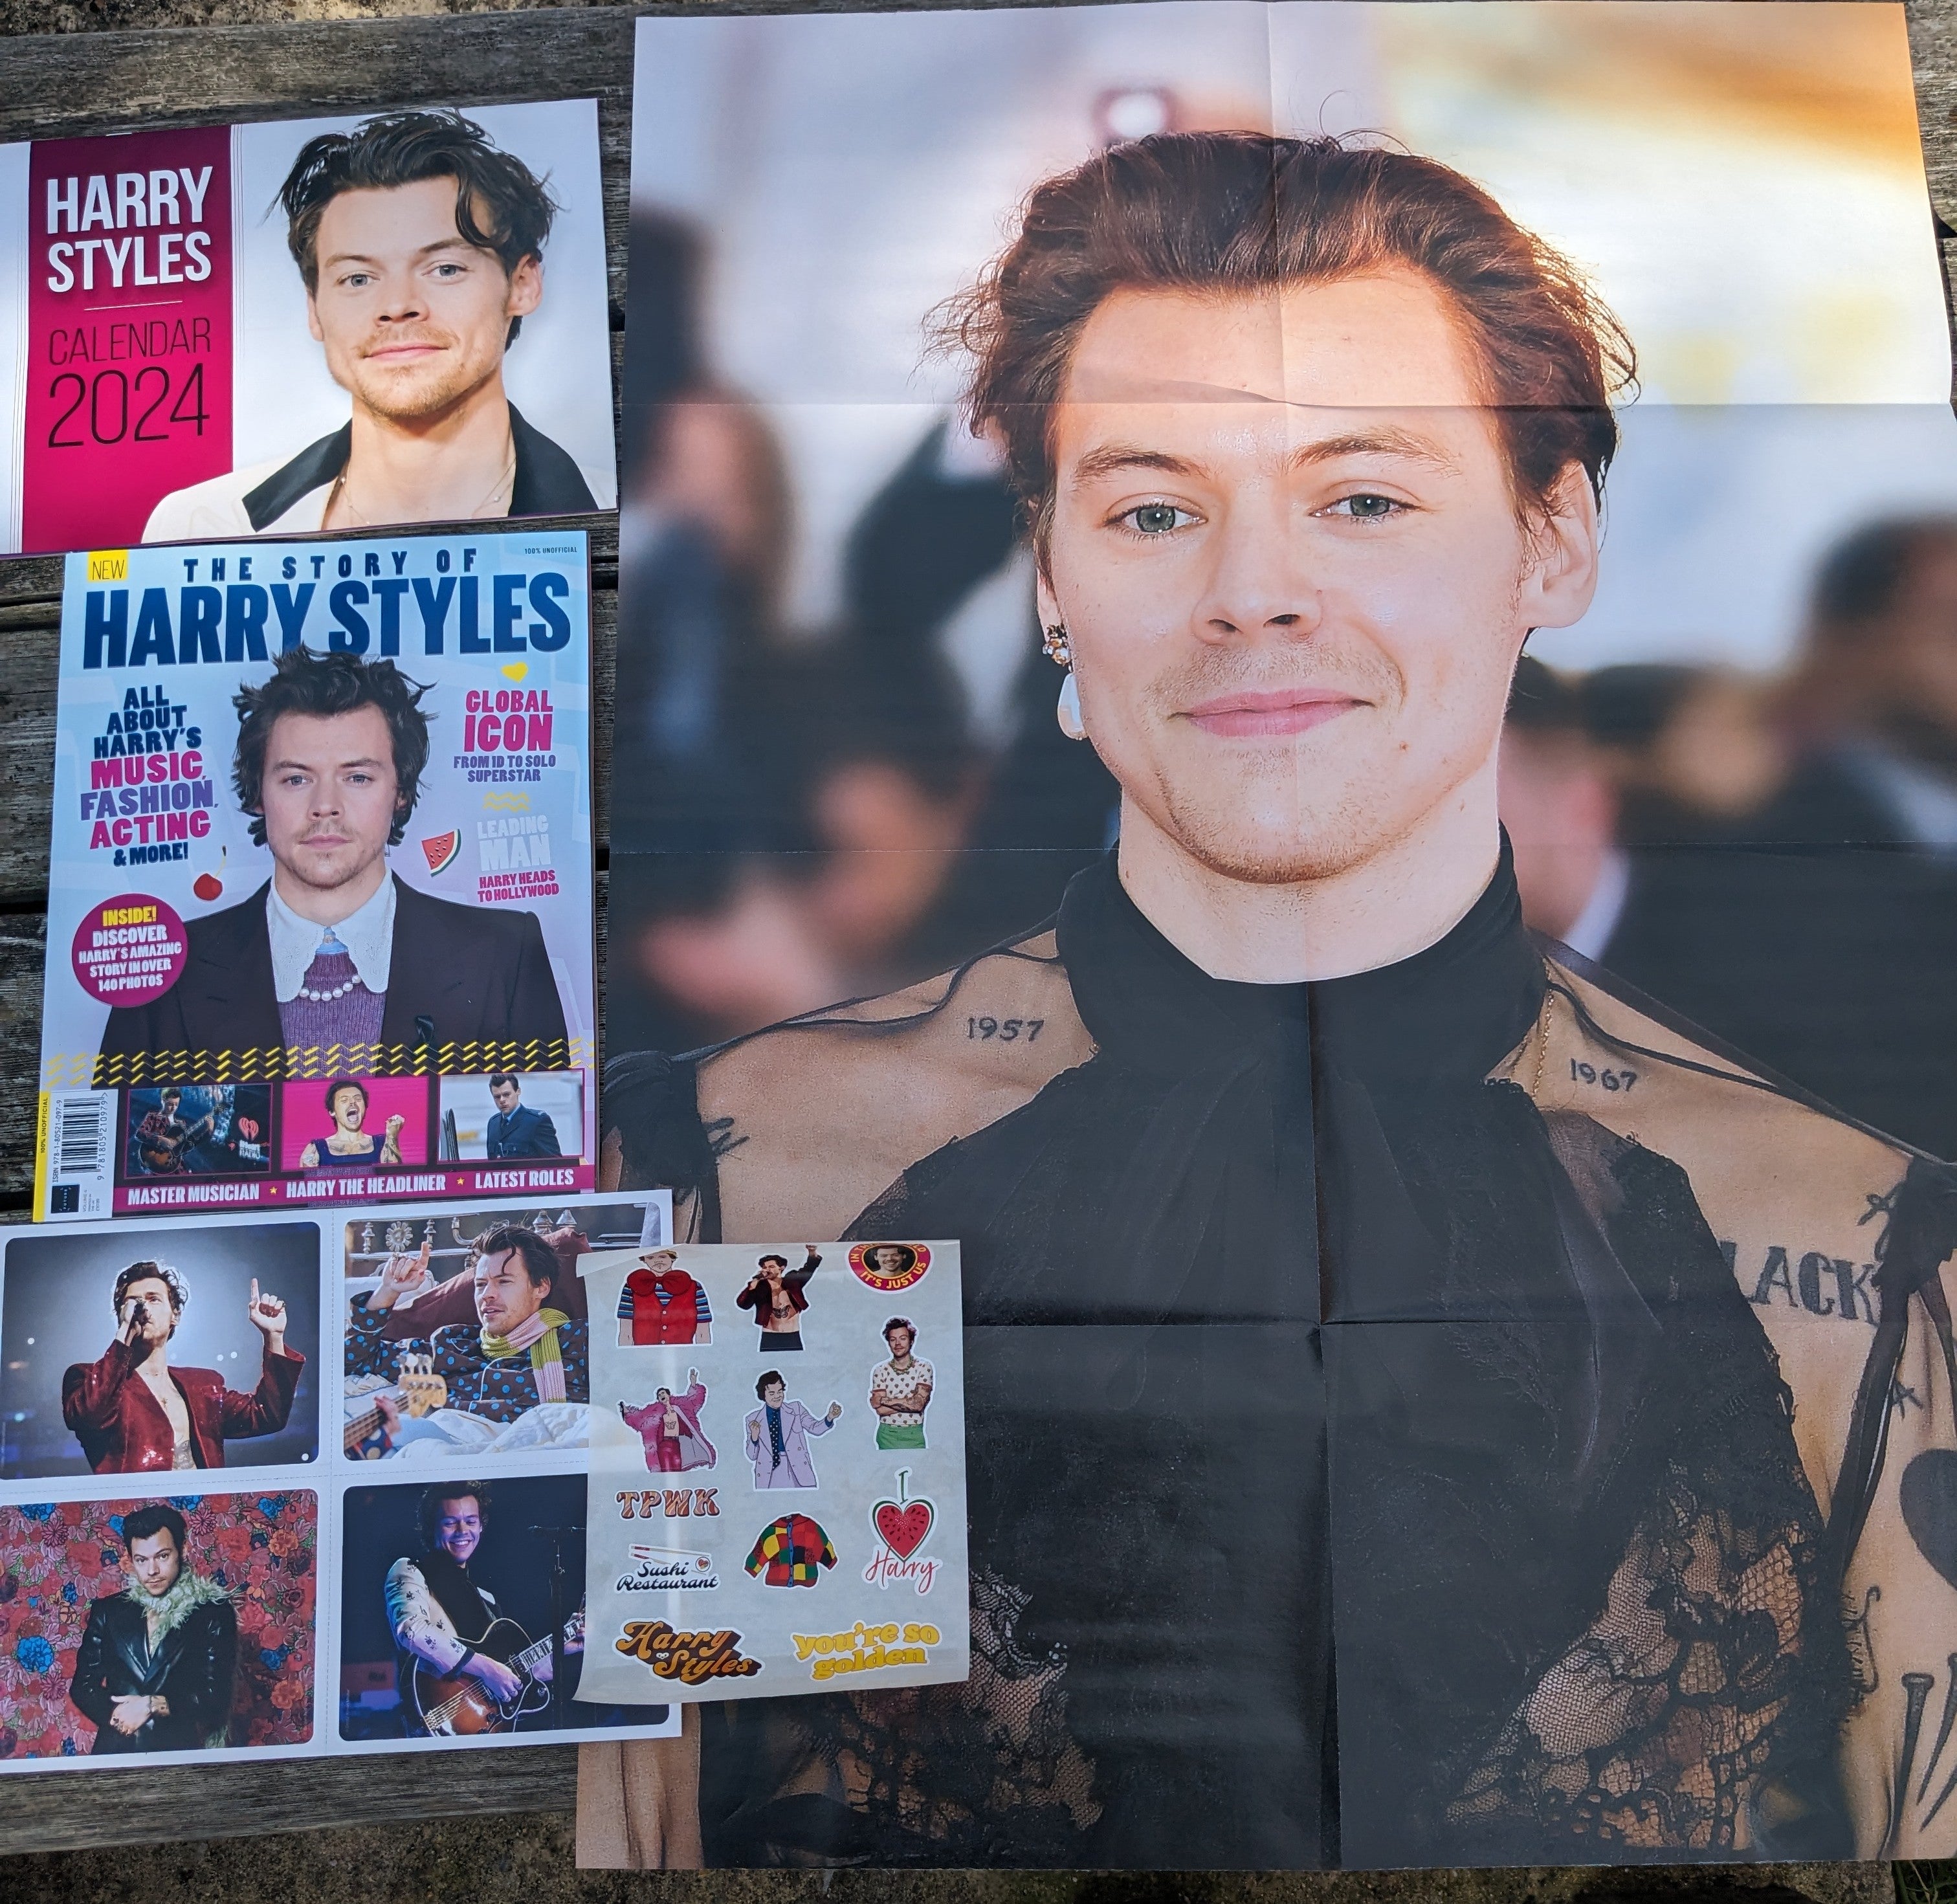 HARRY STYLES ULTIMATE FANPACK (MAGAZINE, STICKERS, POSTERS, ART CARDS